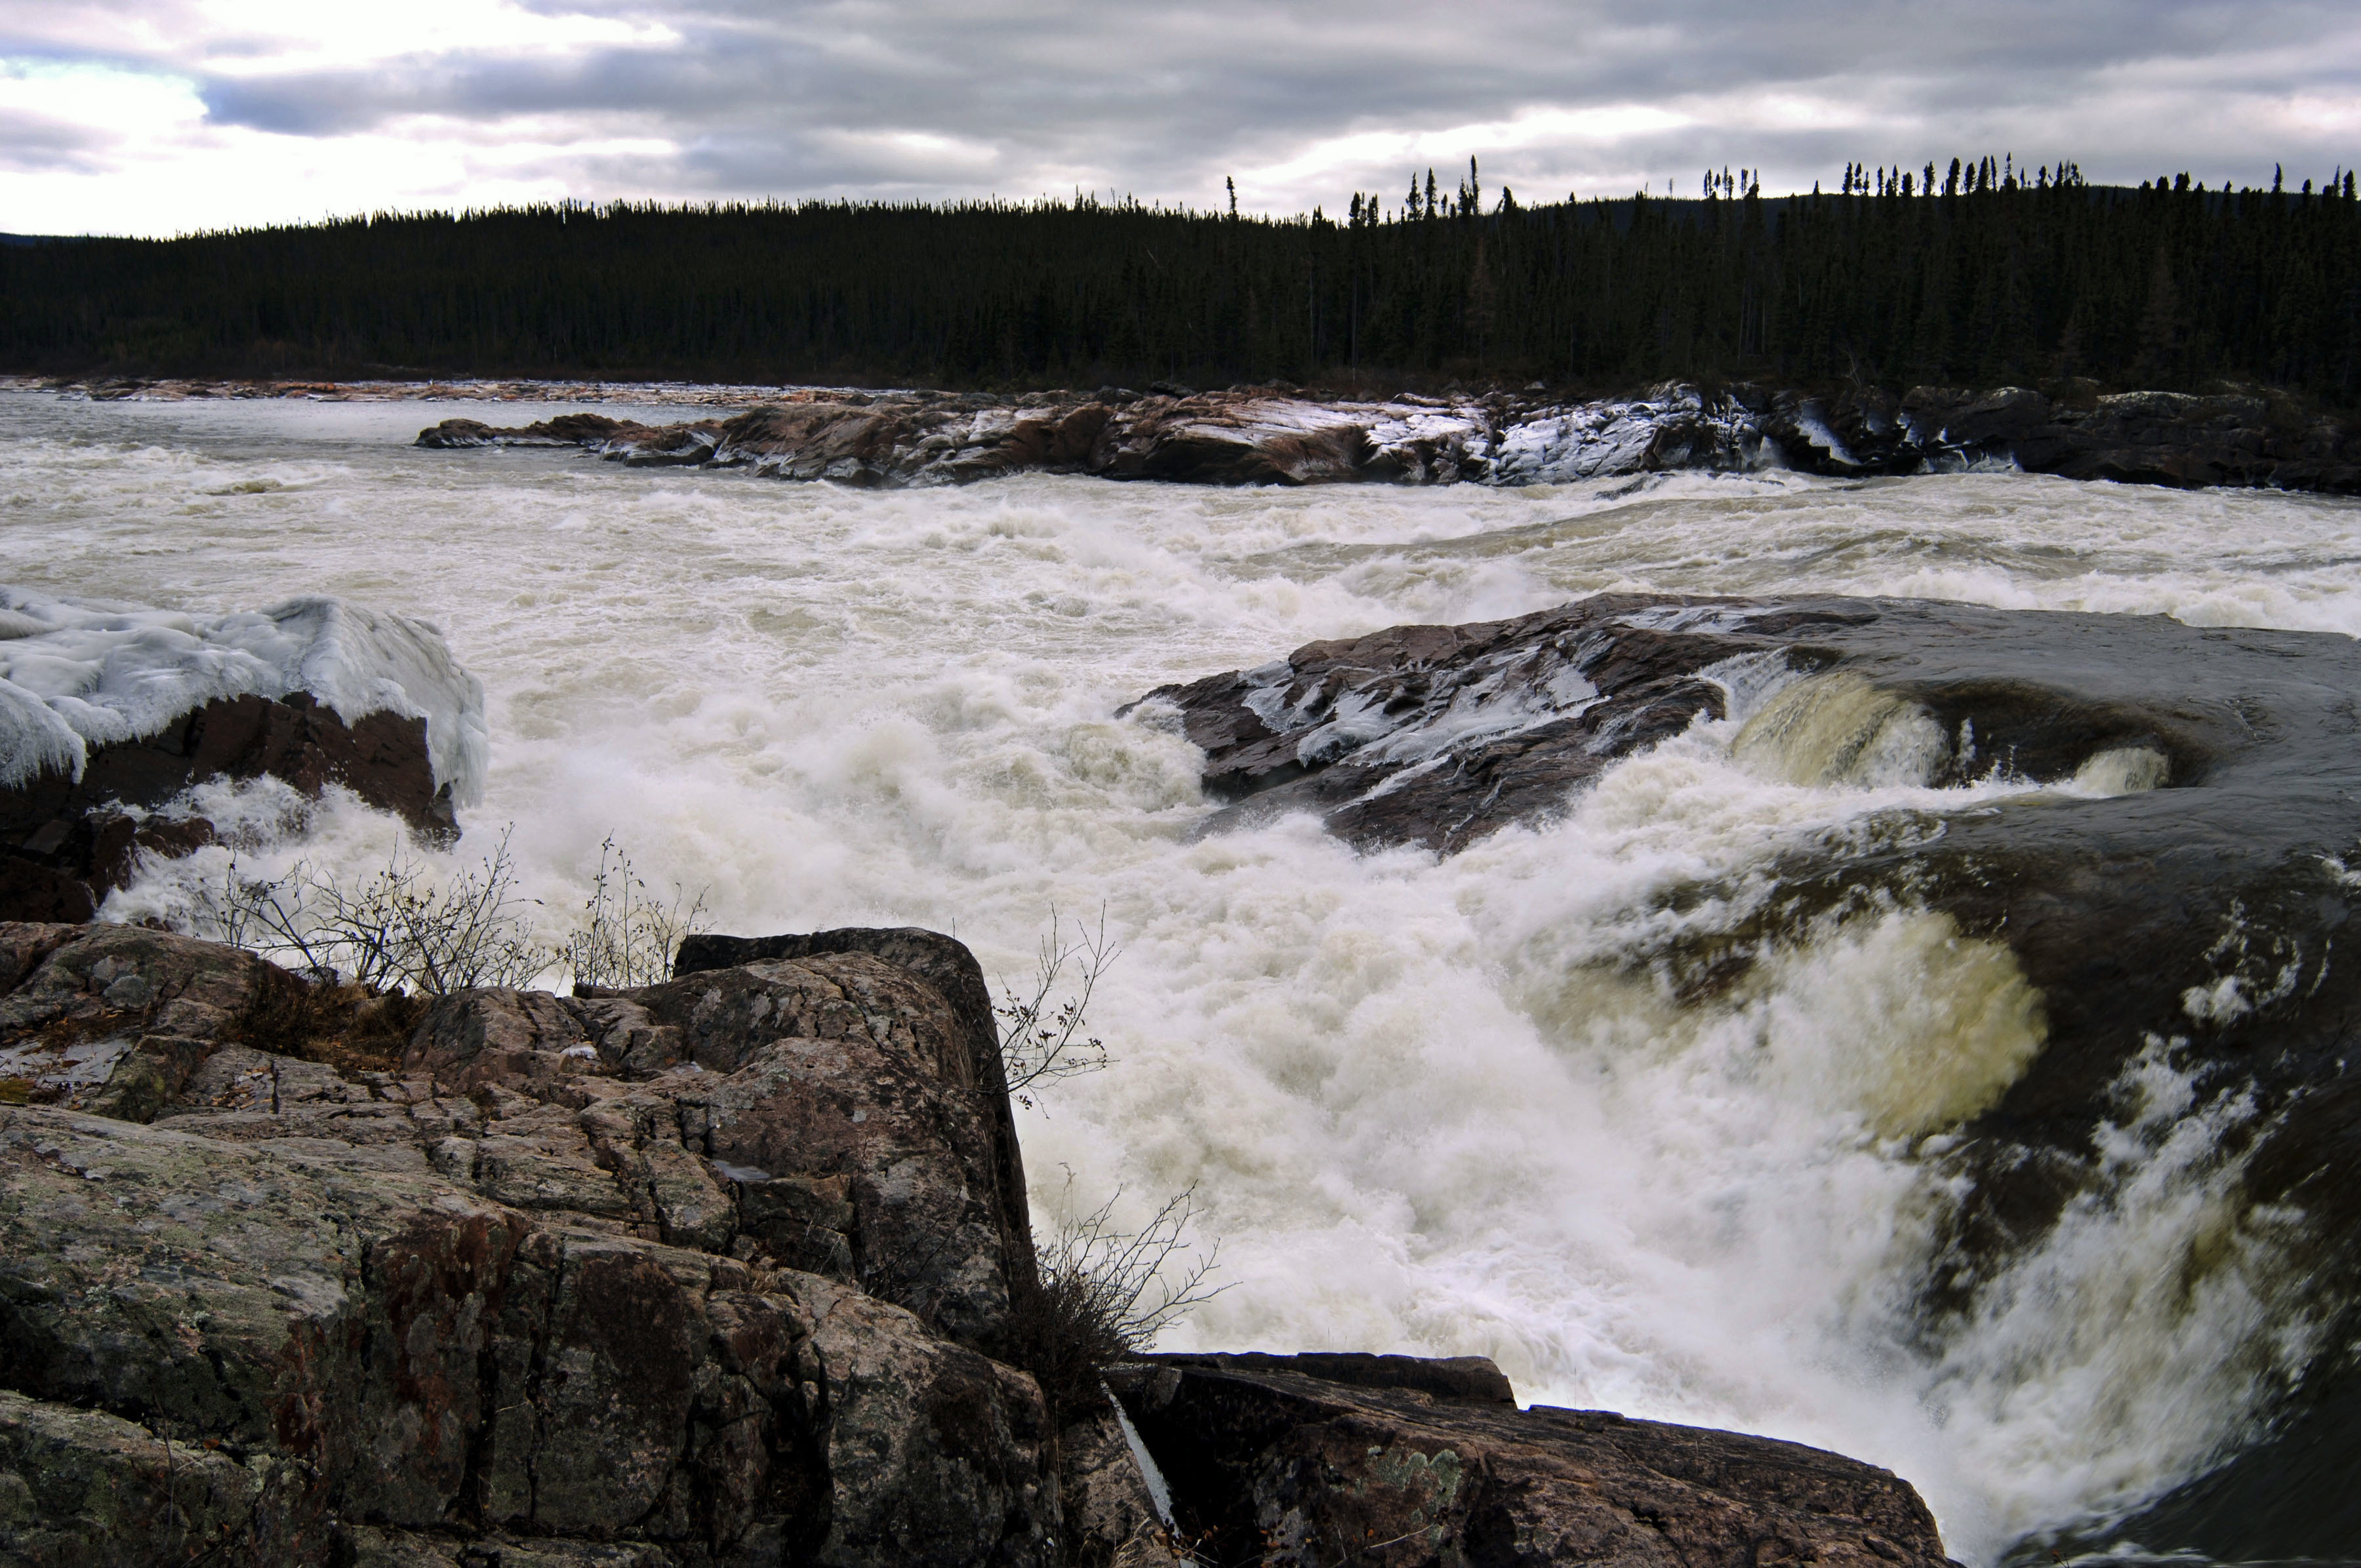 File photo of Muskrat Falls at the Churchill River in central Labrador